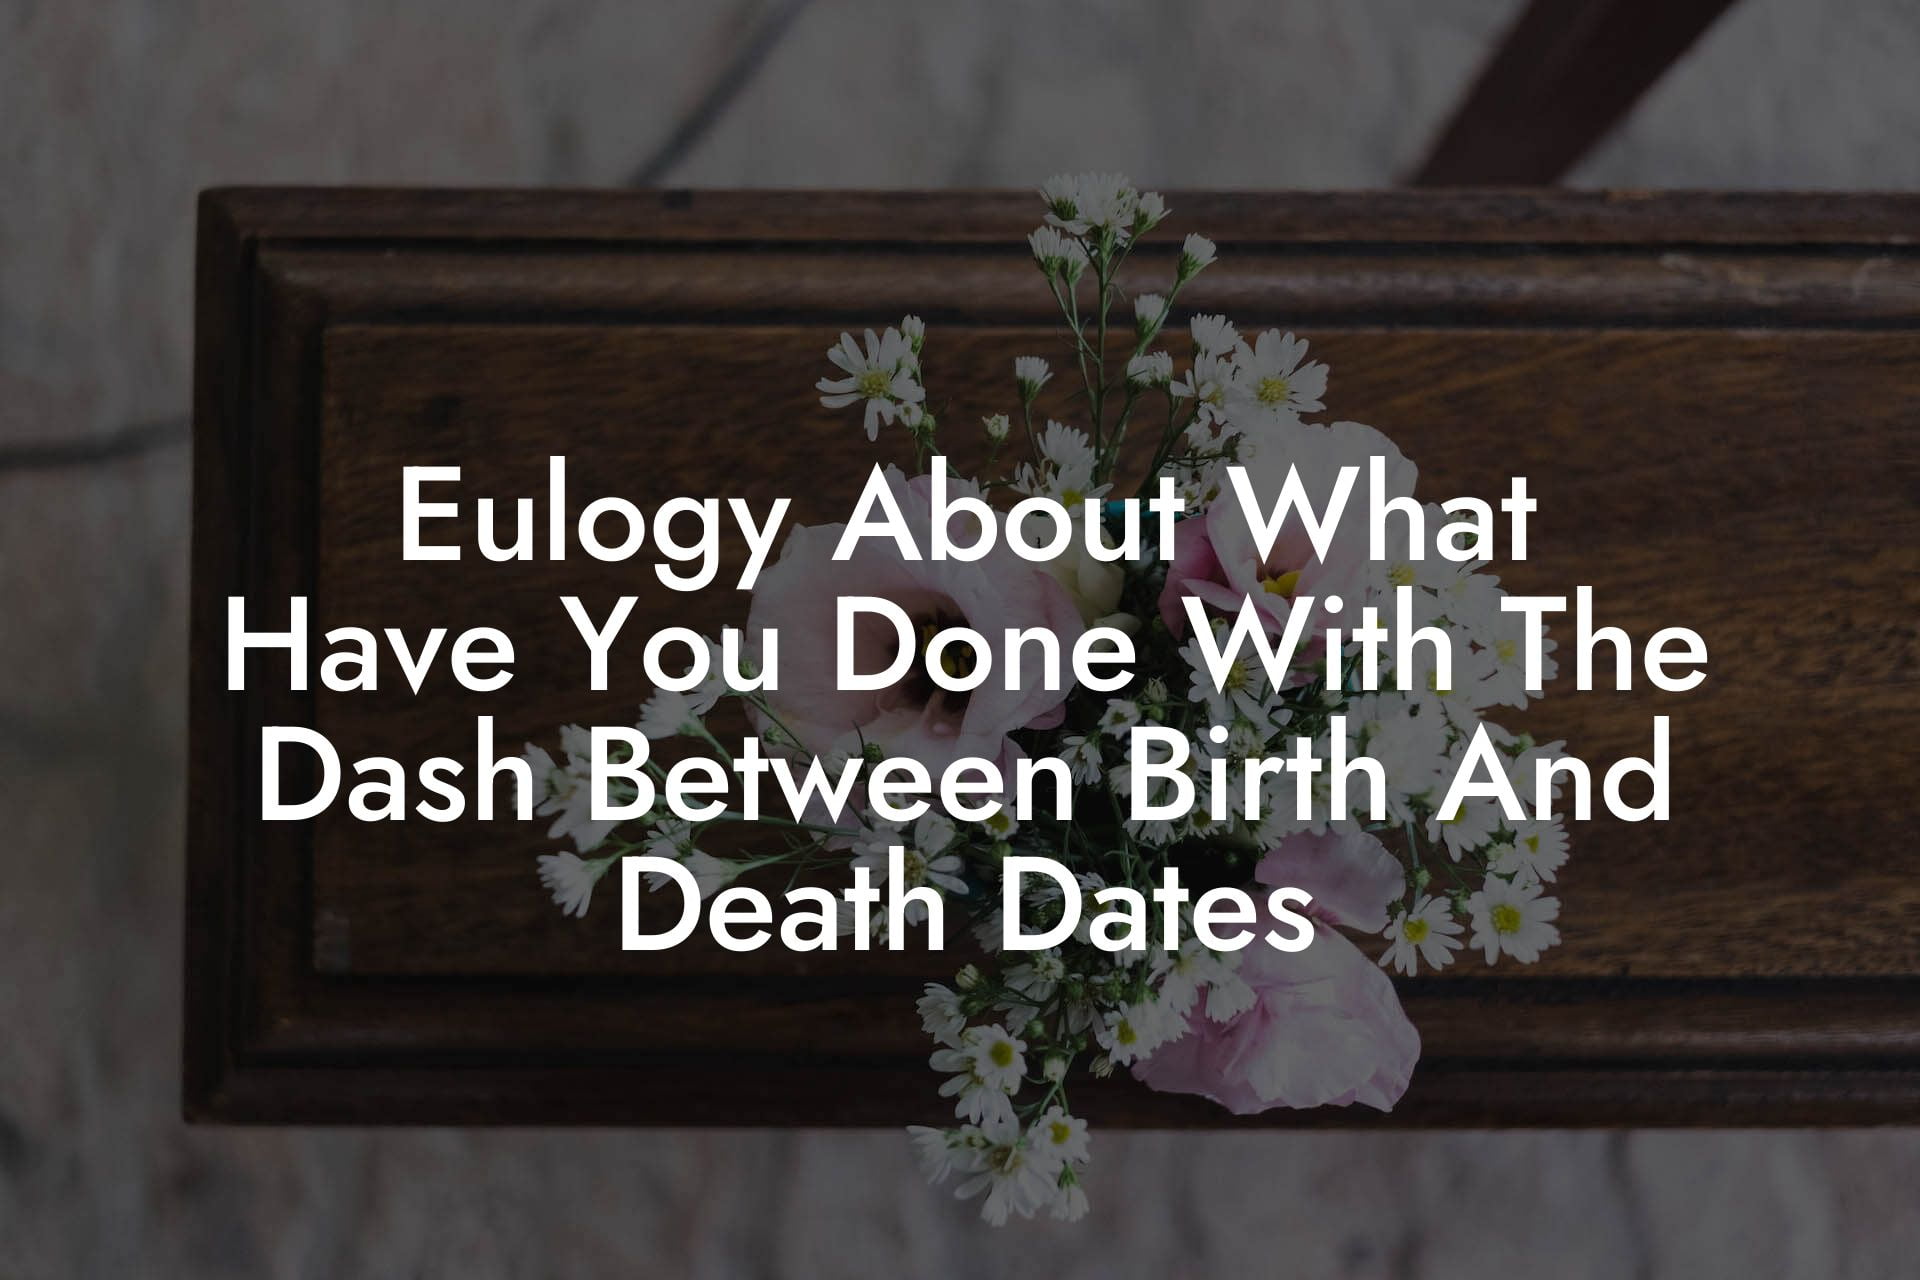 Eulogy About What Have You Done With The Dash Between Birth And Death Dates